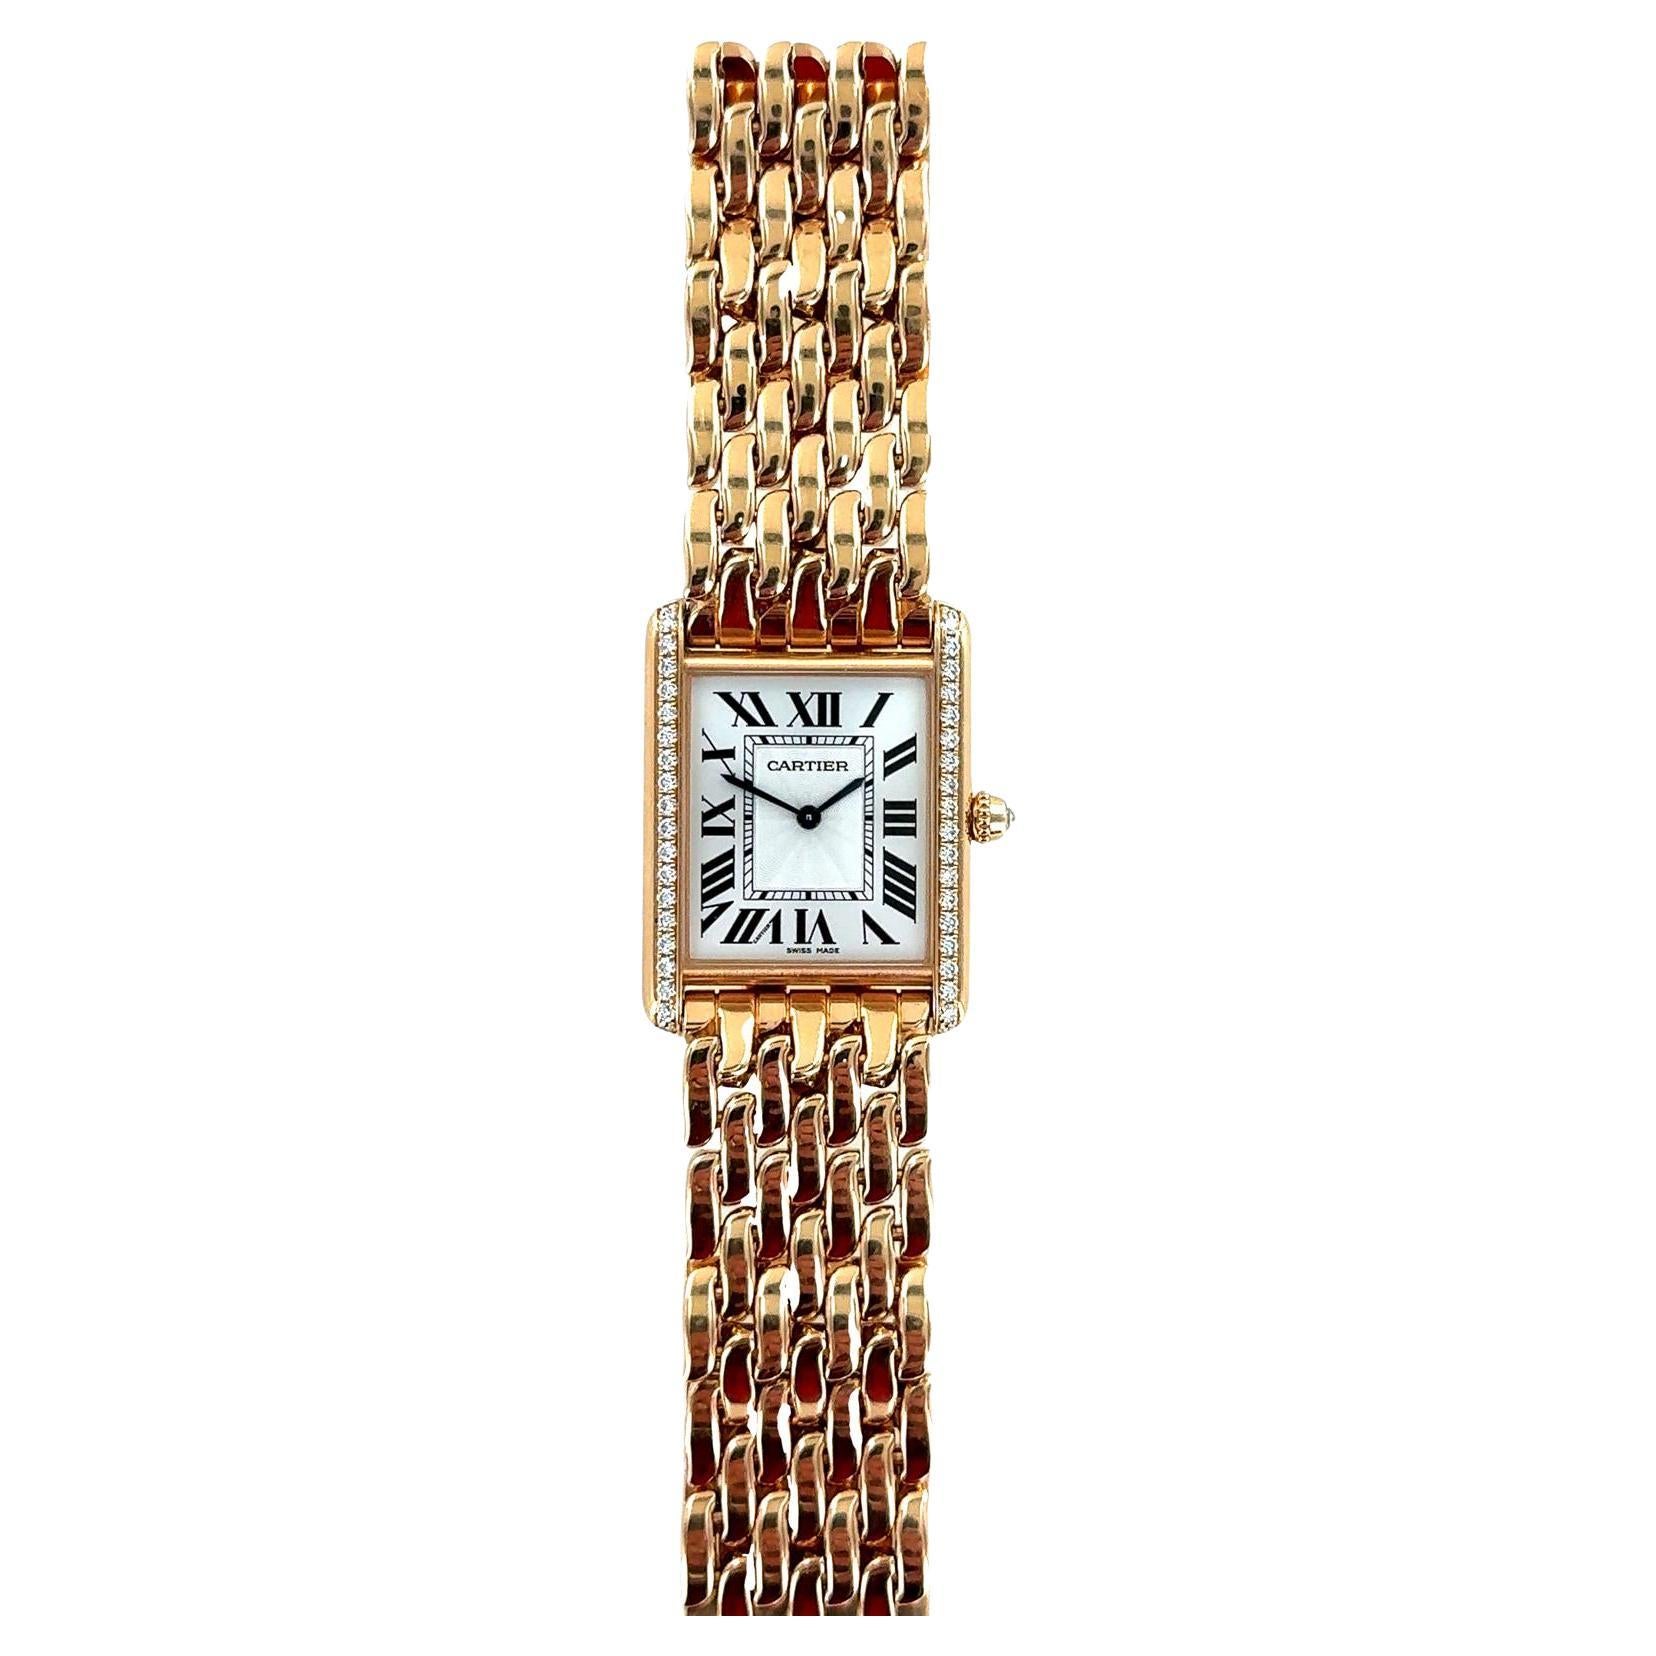 18 karat Rose Gold Tank Louis Cartier watch, large model, Manufacture mechanical movement with manual winding, caliber 1917 MC. Case in rose gold is set with 40 round brilliant-cut diamonds and beaded crown set with one brilliant-cut diamond of 0.65